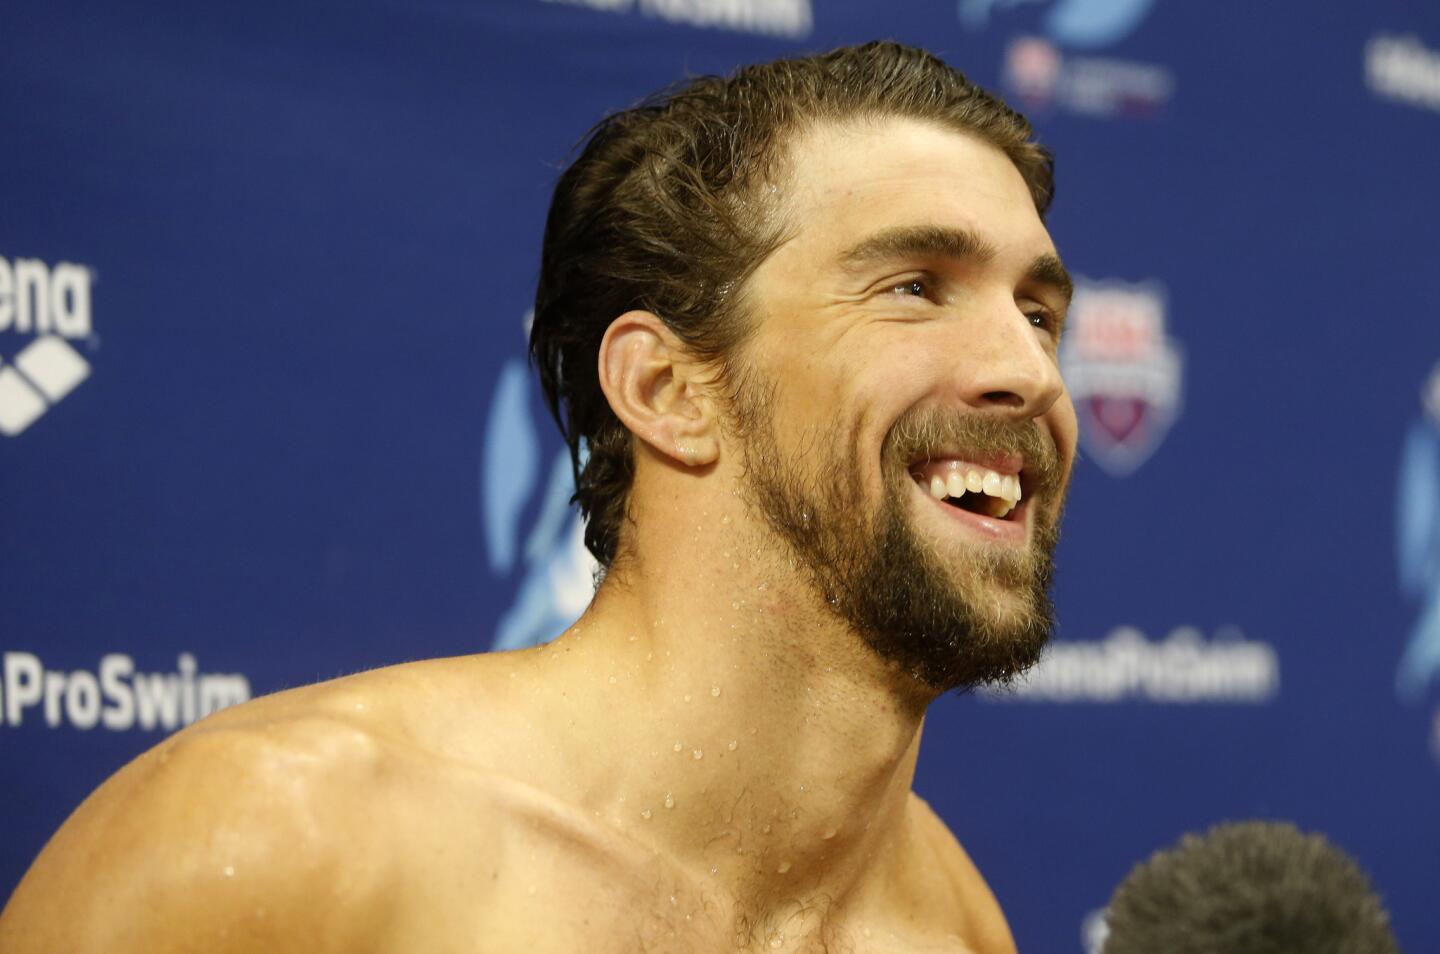 Michael Phelps smiles after winning the men's 200-meter individual medley during the Arena Pro Swim Series on Sunday night.